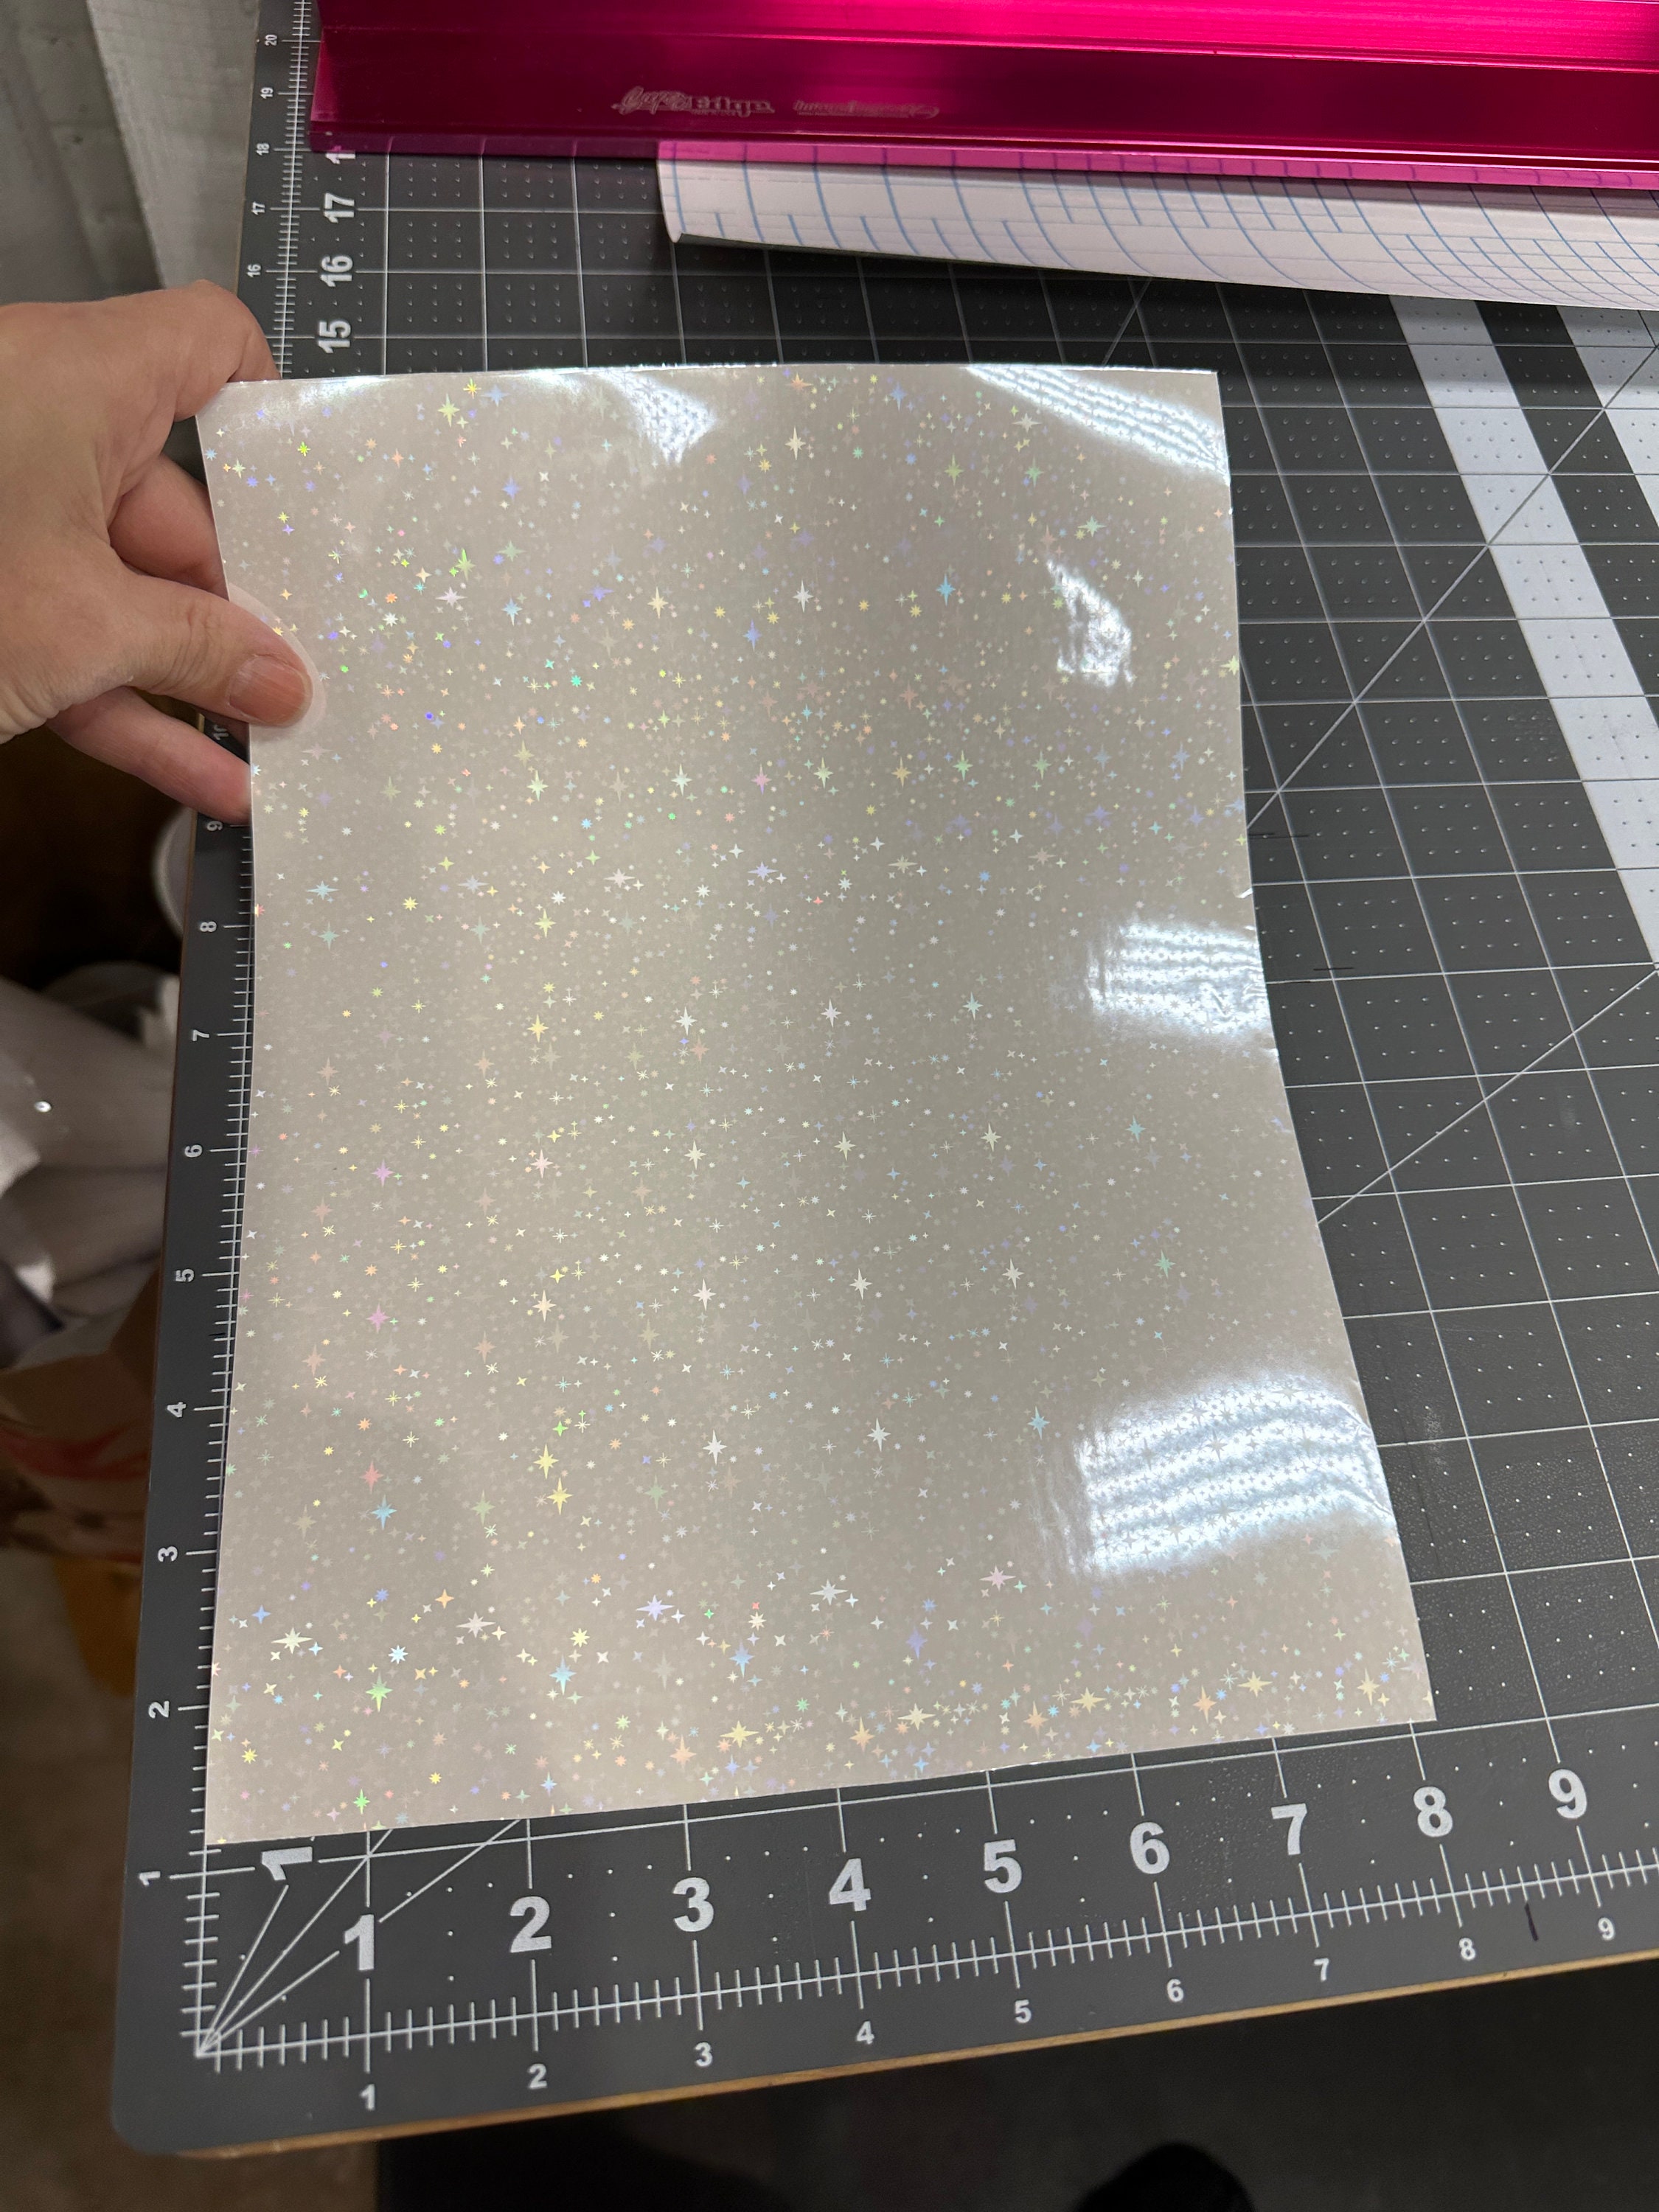 Holographic Laminating Sheets SAMPLE PACK 12 x 12 inches, 6 x 12